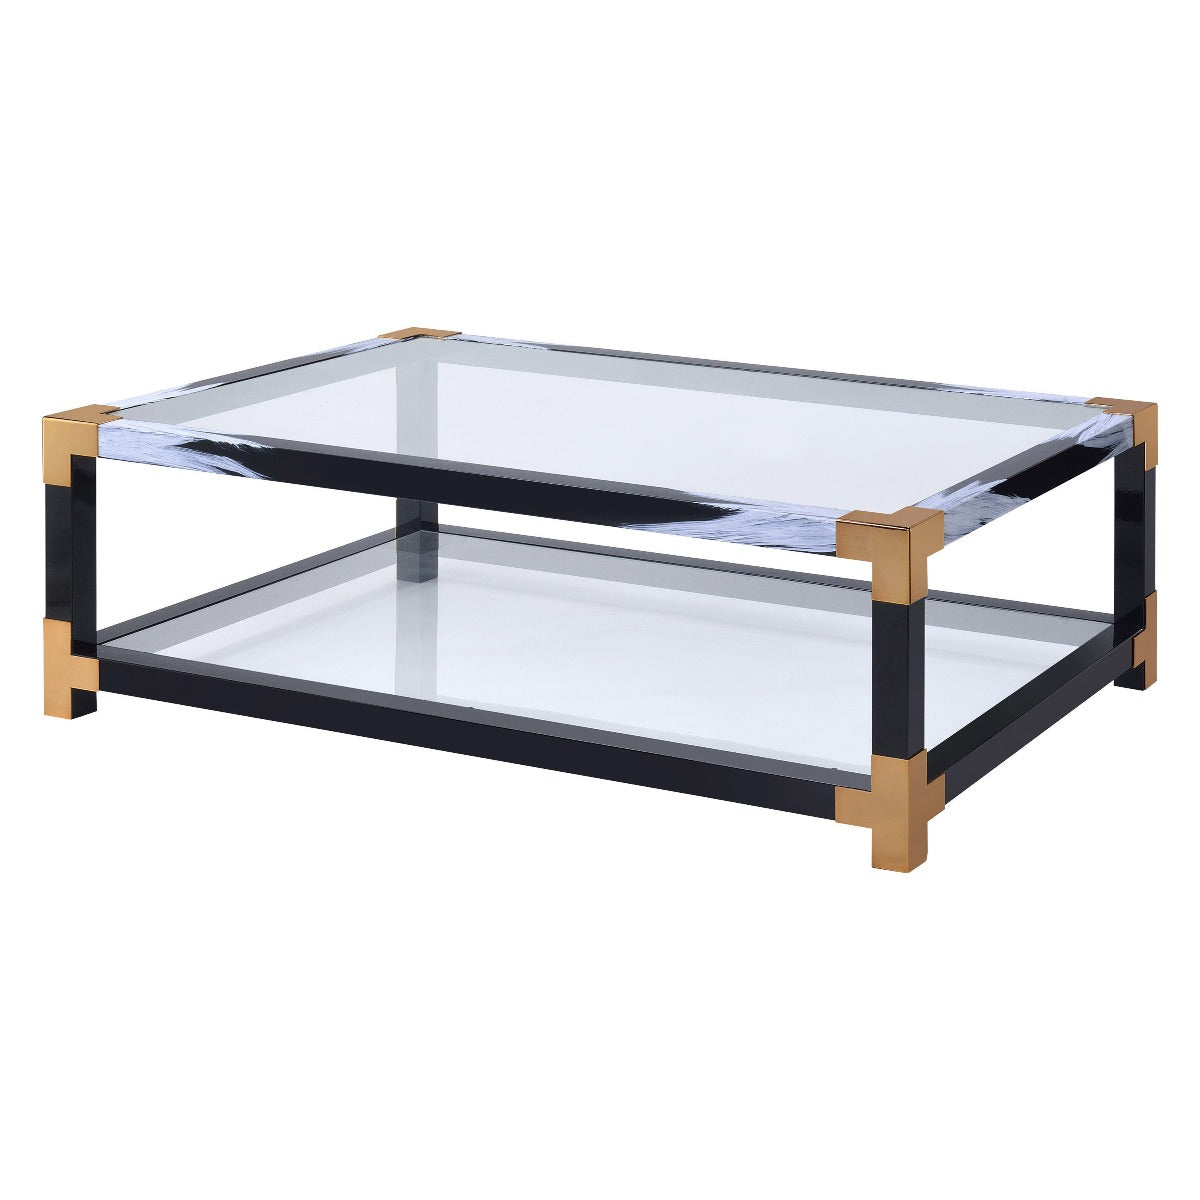 ACME Furniture TV & Media Units - Lafty Coffee Table, White Brushed & Clear Glass